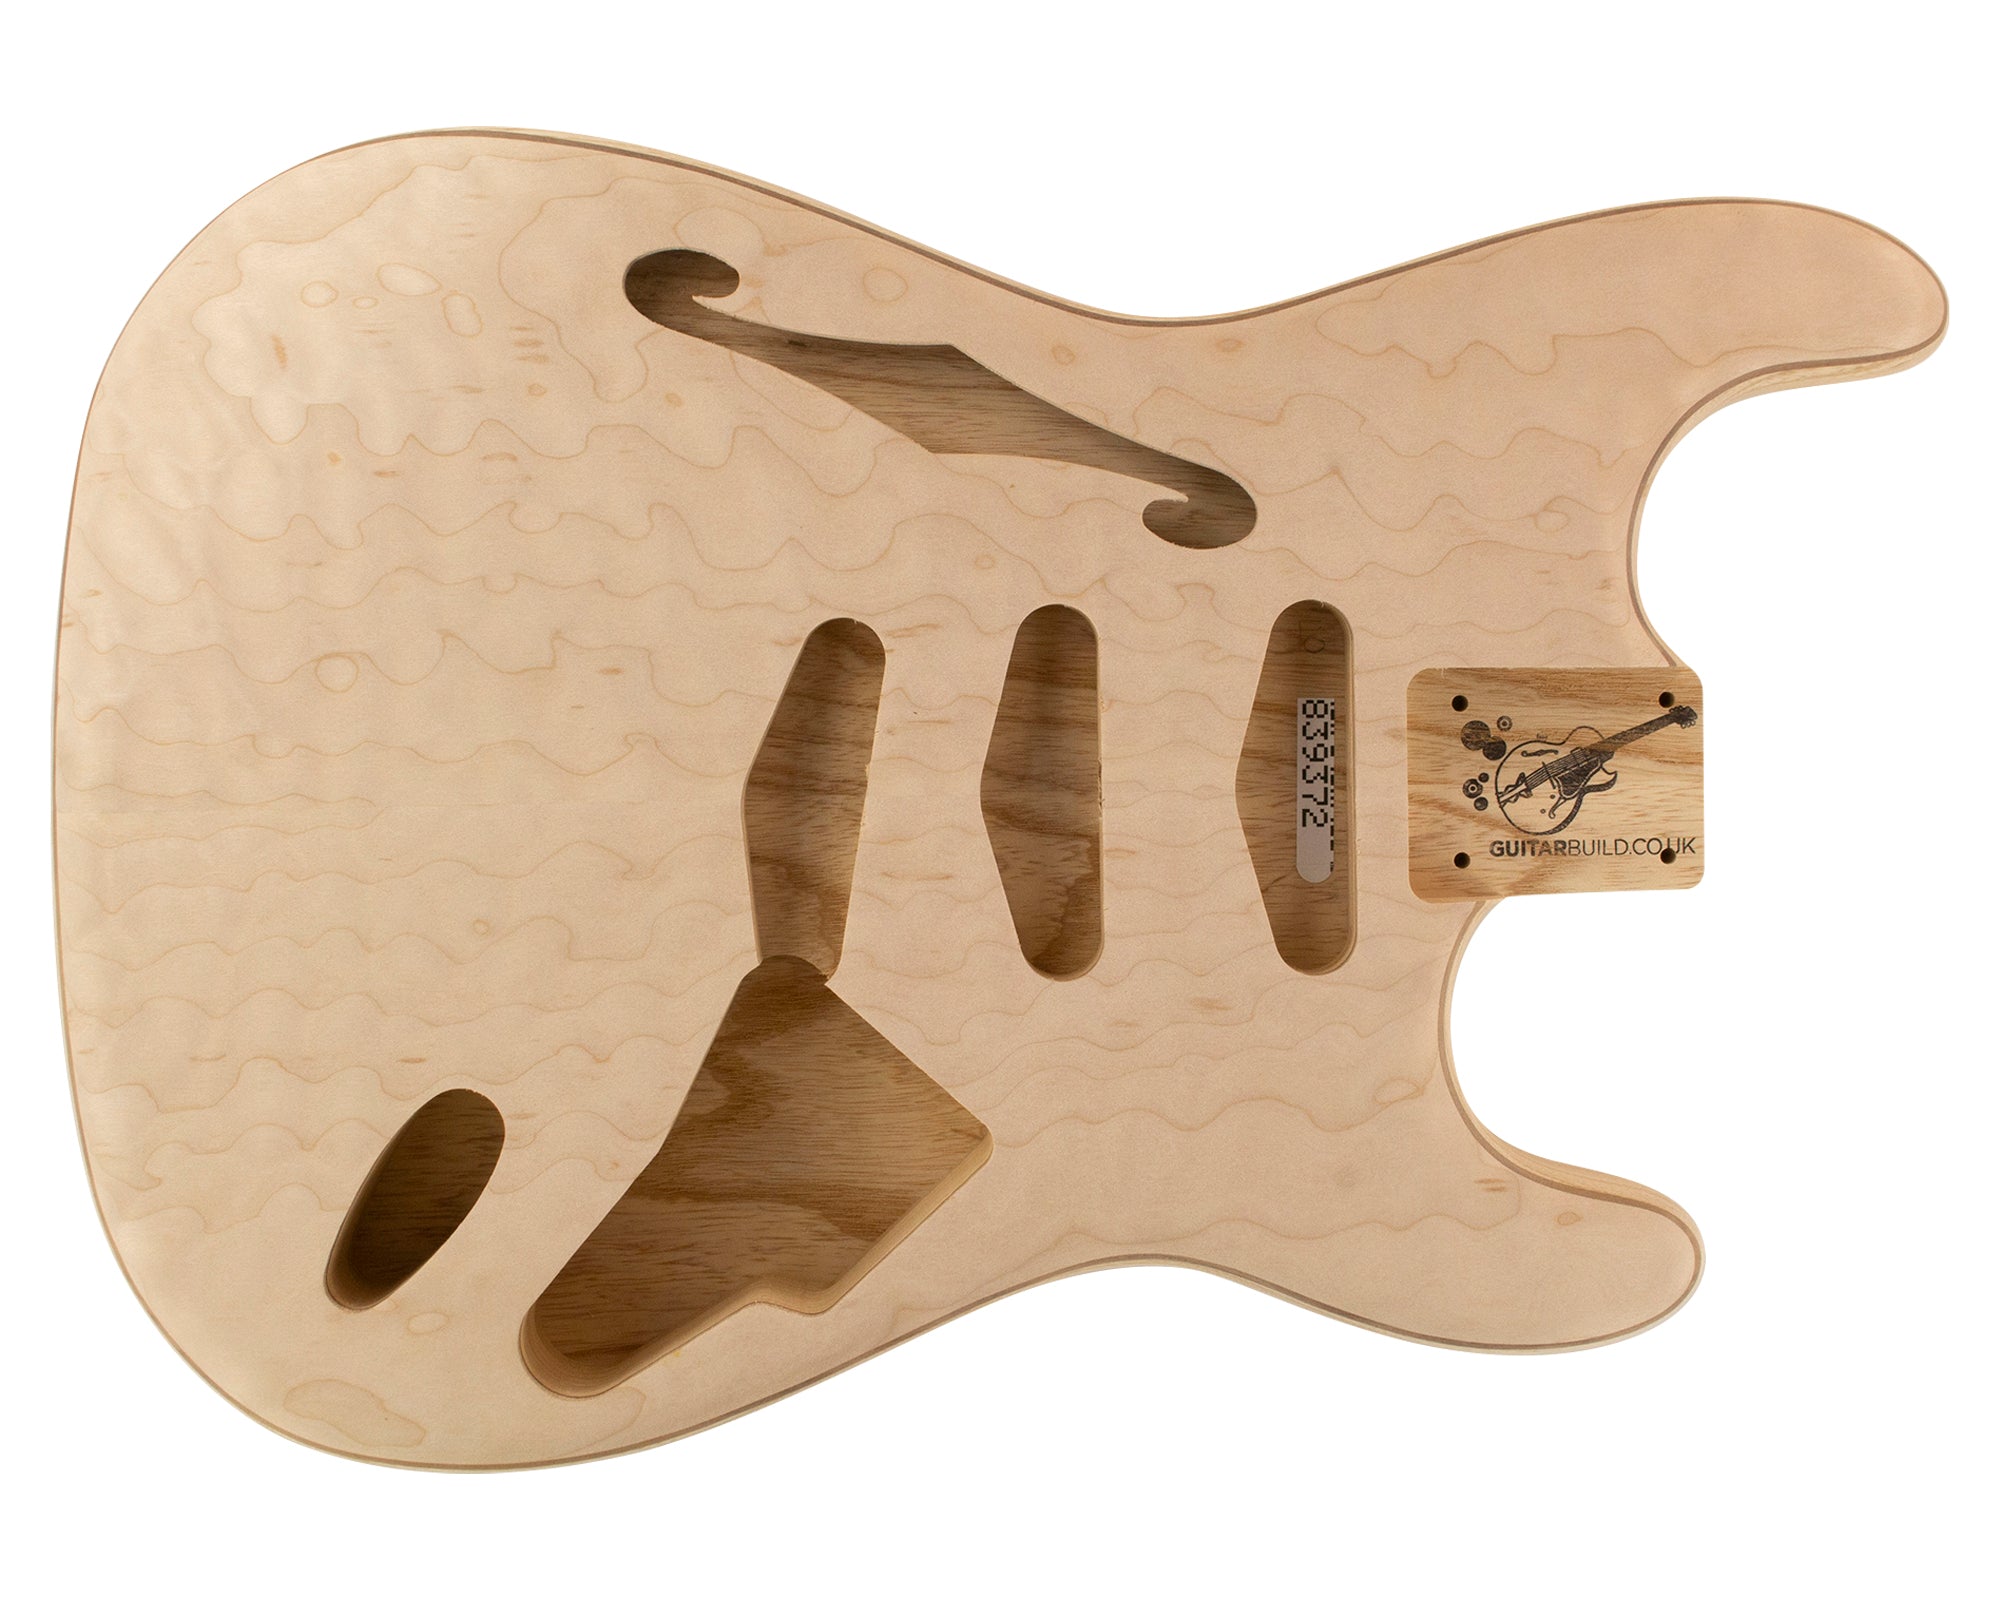 SC CHAMBERED BODY 2pc Swamp Ash (Curly Maple Top) 1.7 Kg - 839372-Guitar Bodies - In Stock-Guitarbuild